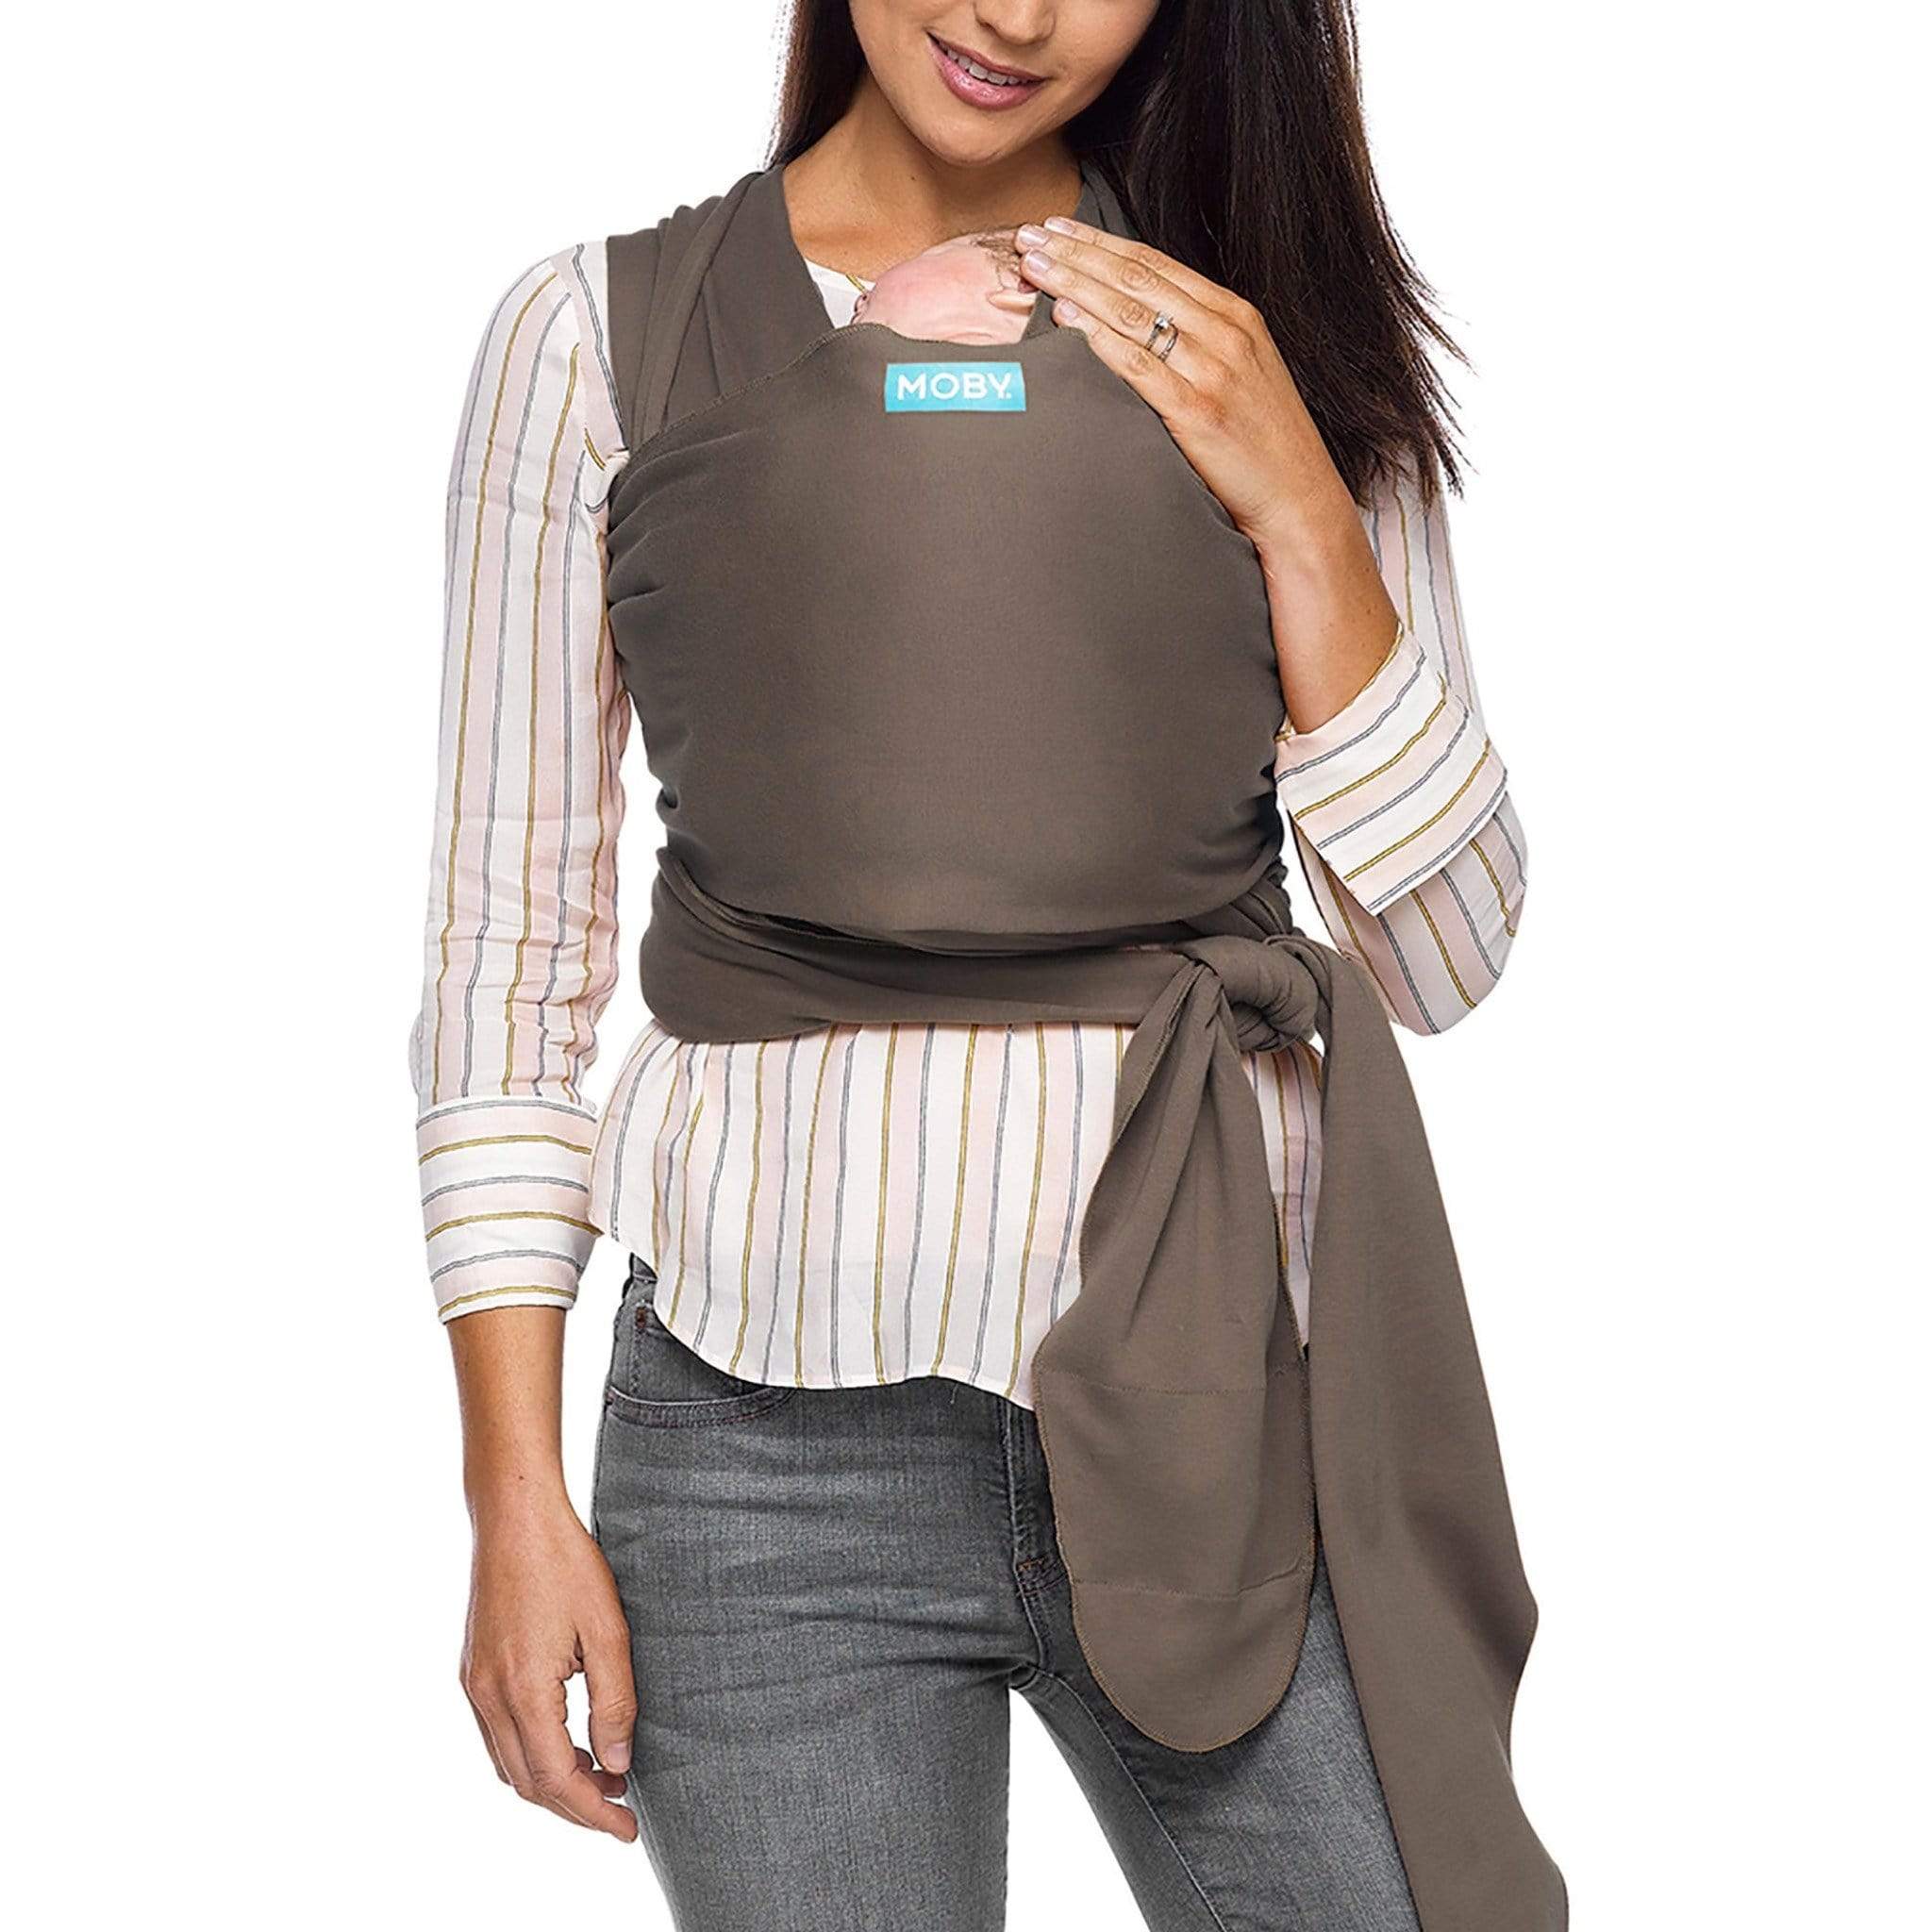 Moby baby carriers Moby Classic Wrap Cocoa